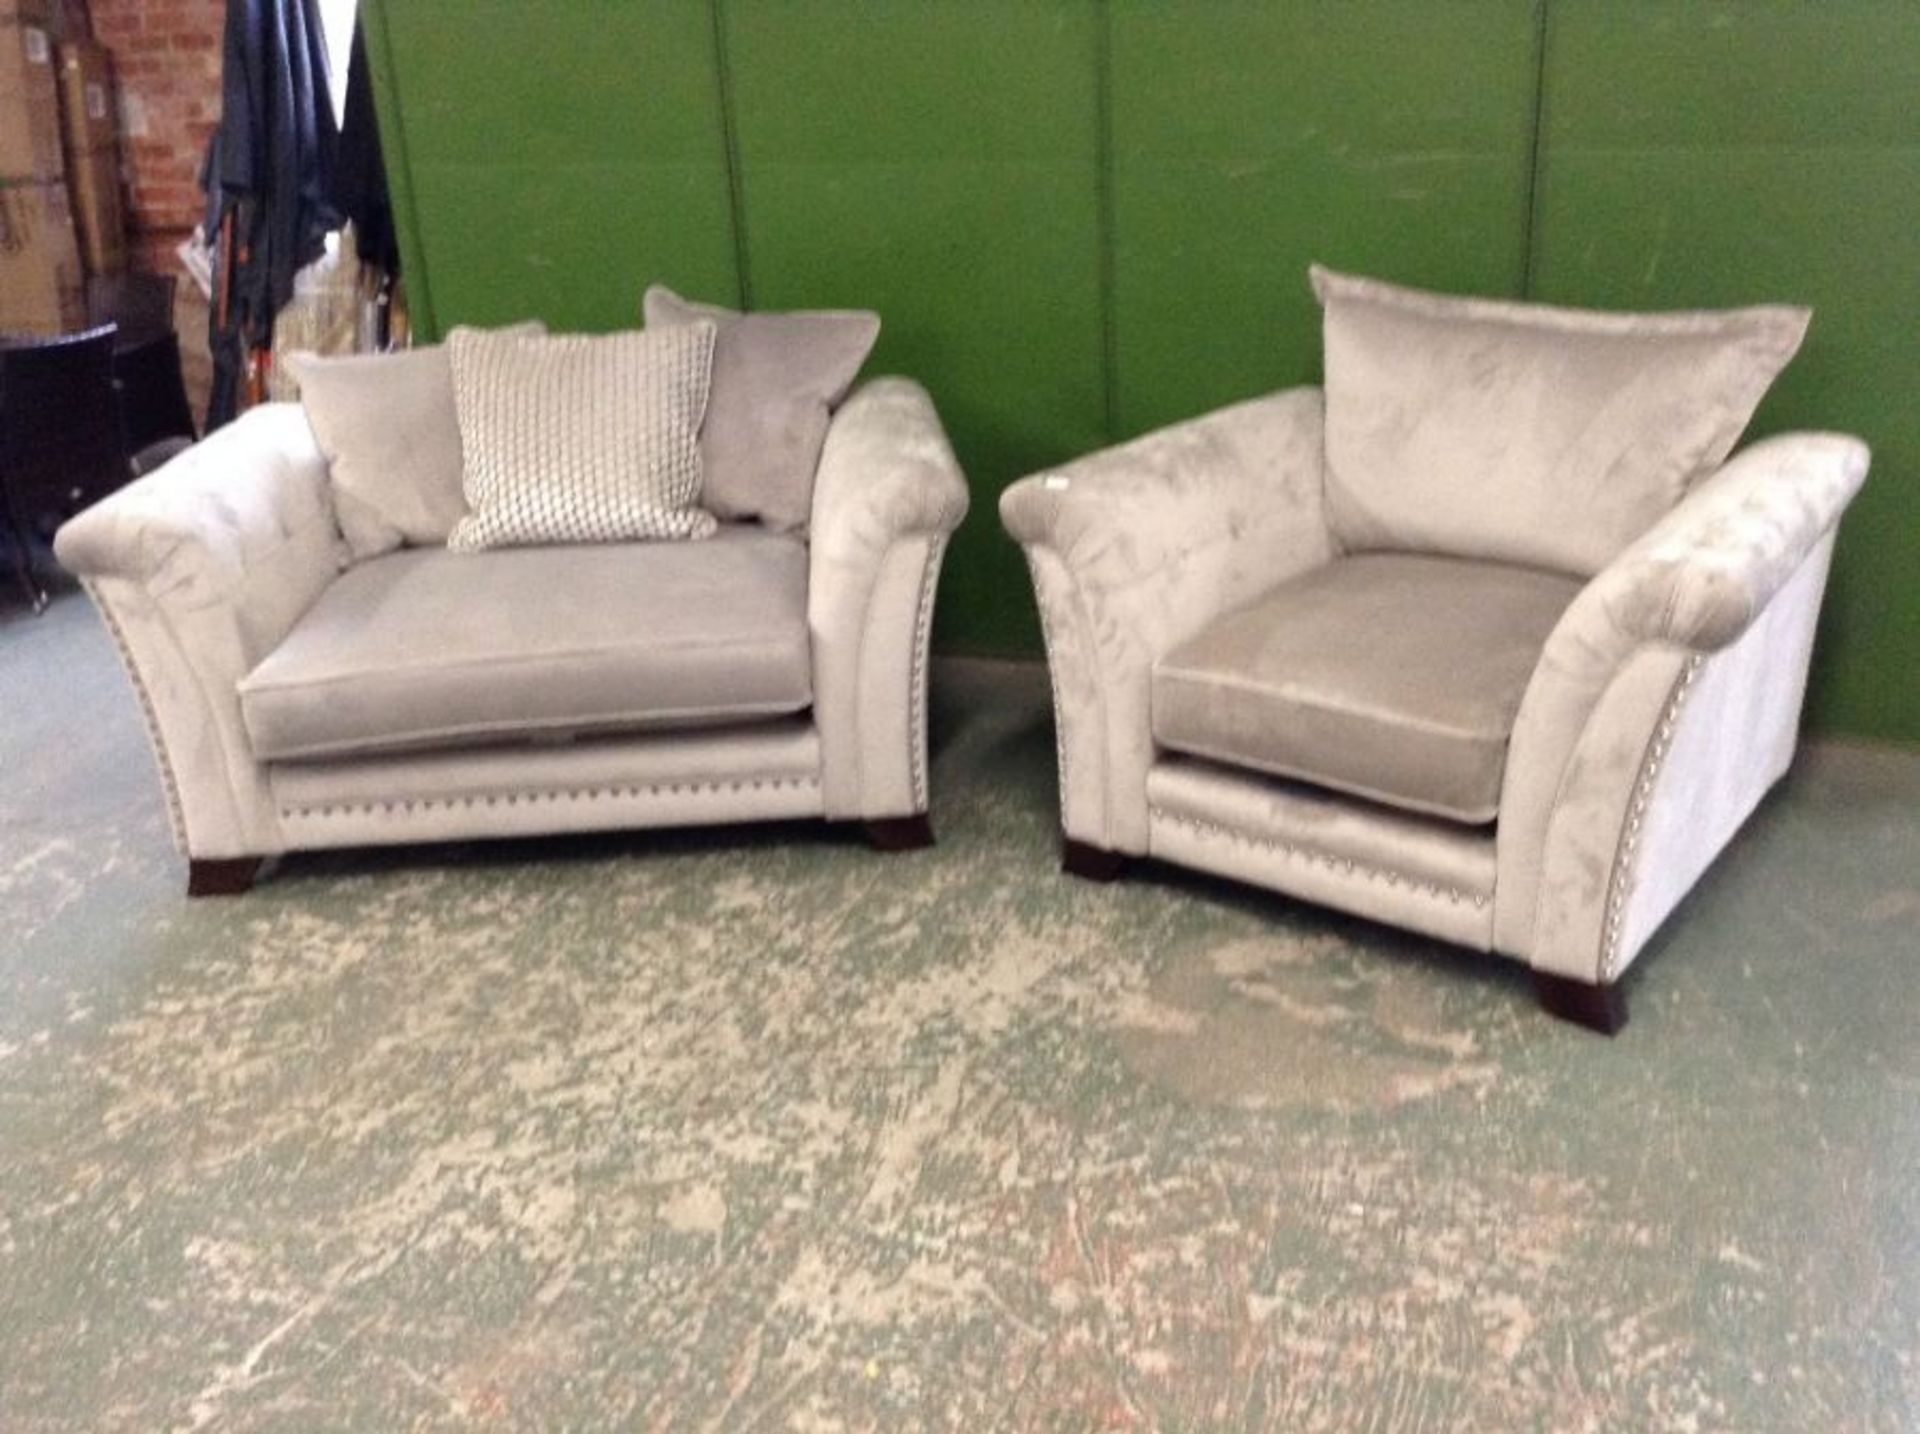 GREY SNUG CHAIR AND CHAIR (HH39-747124-HH39